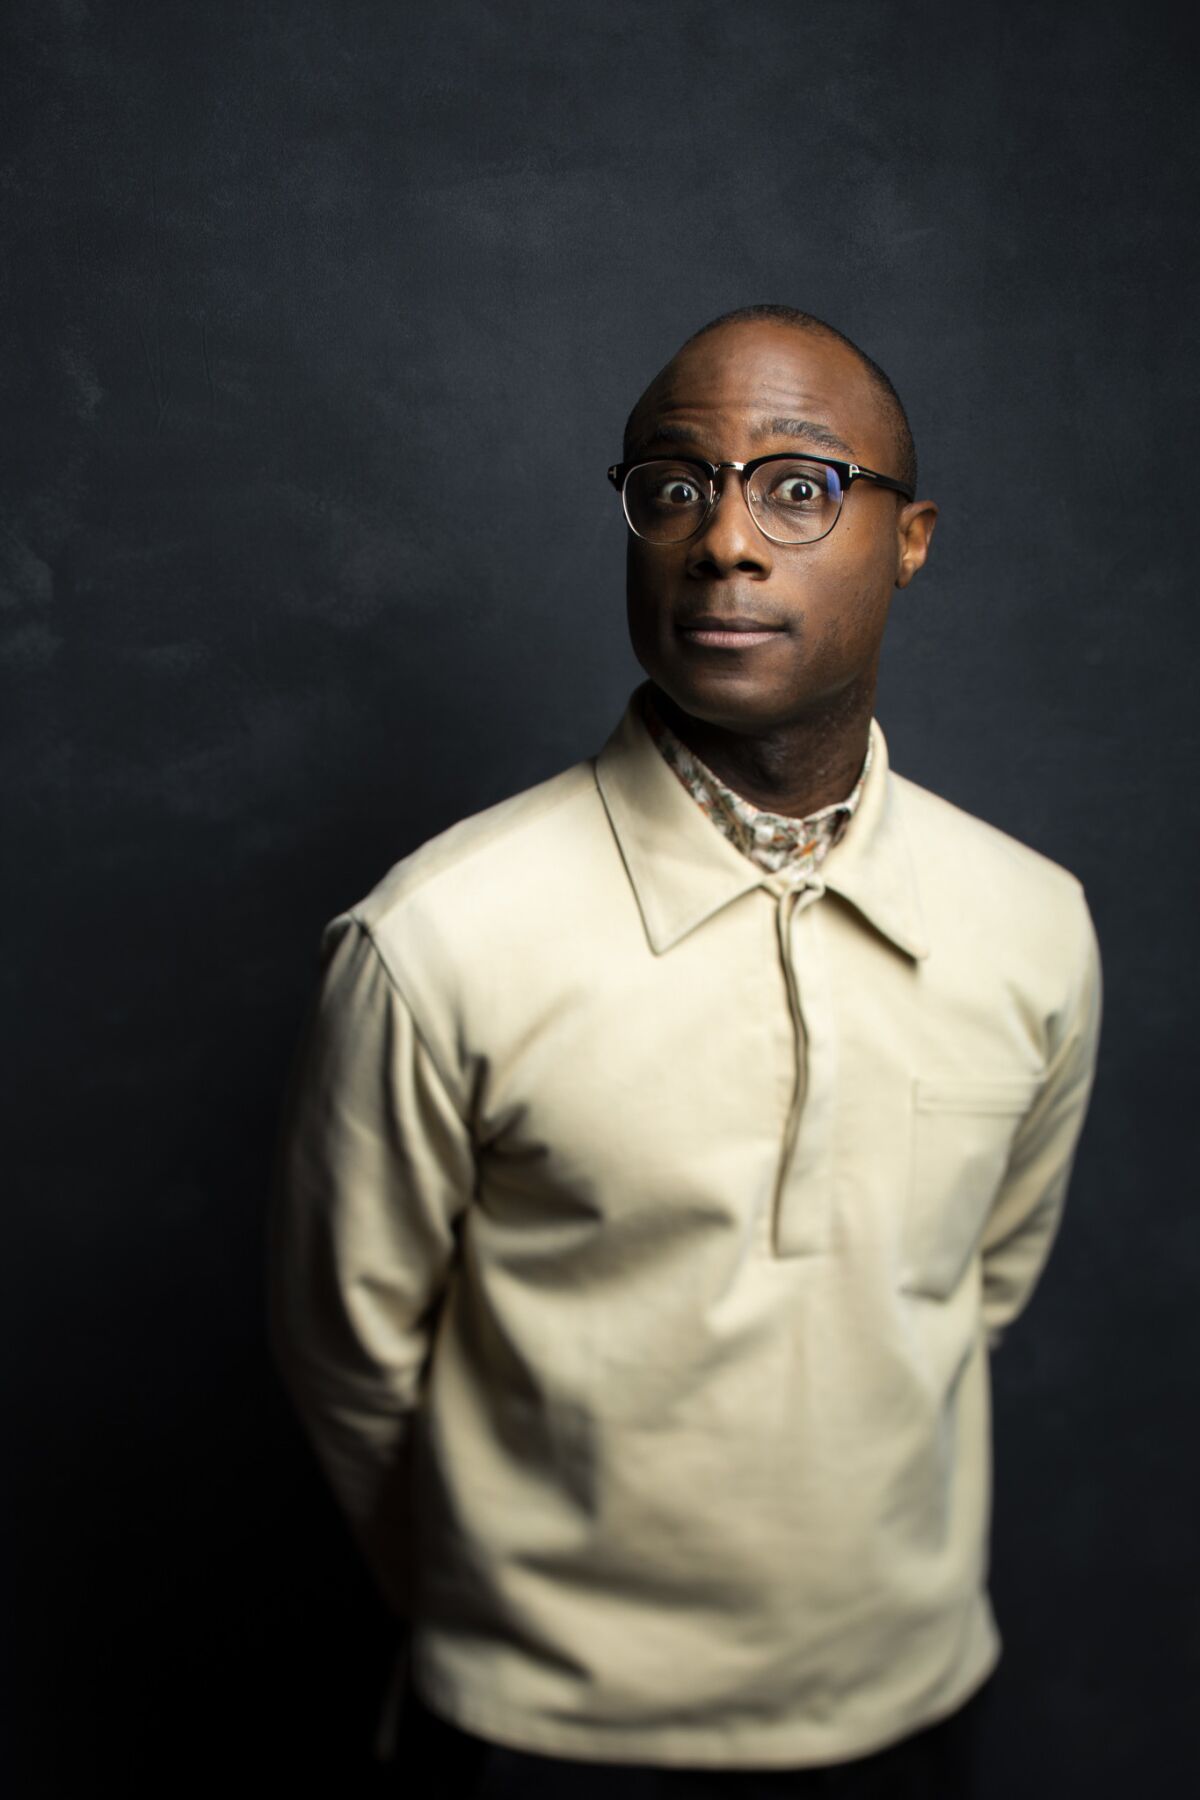 Director Barry Jenkins from the film "If Beale Street Could Talk."